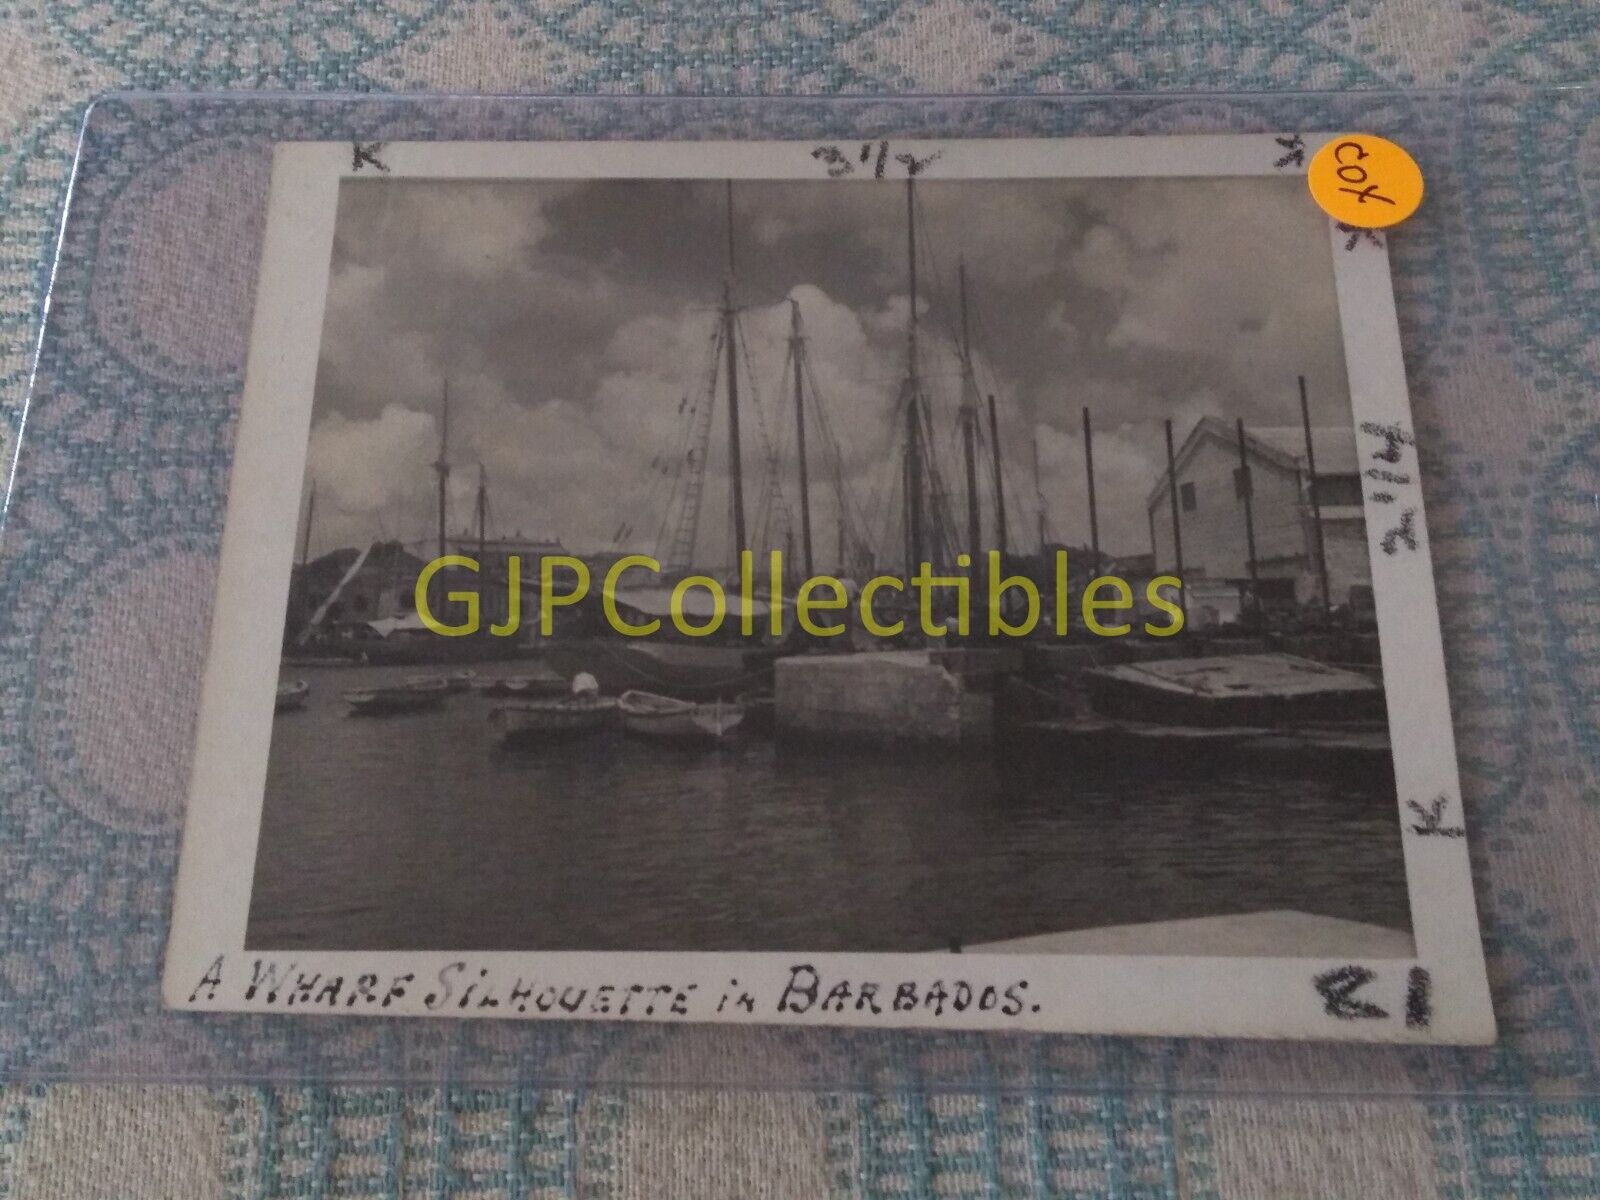 COX VINTAGE PHOTOGRAPH Spencer Lionel Adams A WHARF SILHOUETTE IN BARBADOS